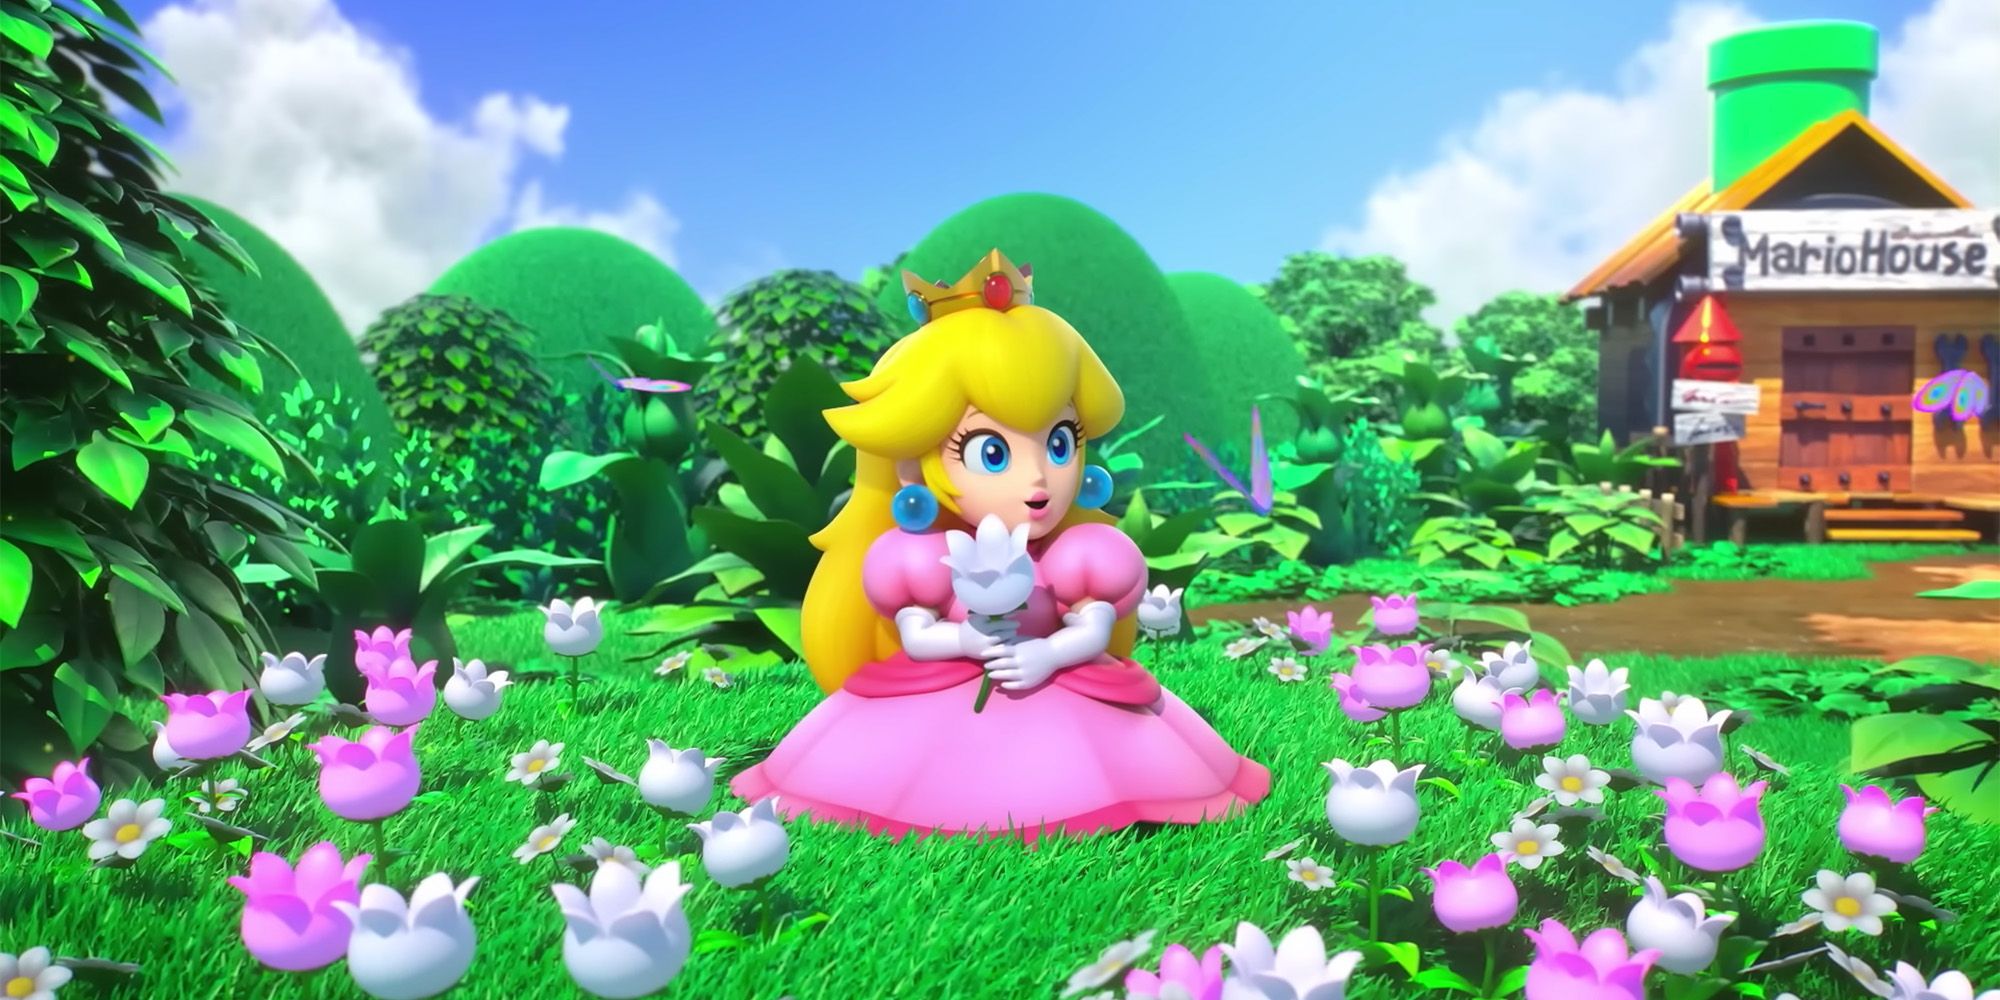 Super Mario RPG Remake: Princess Peach Sitting In A Field Of Flowers